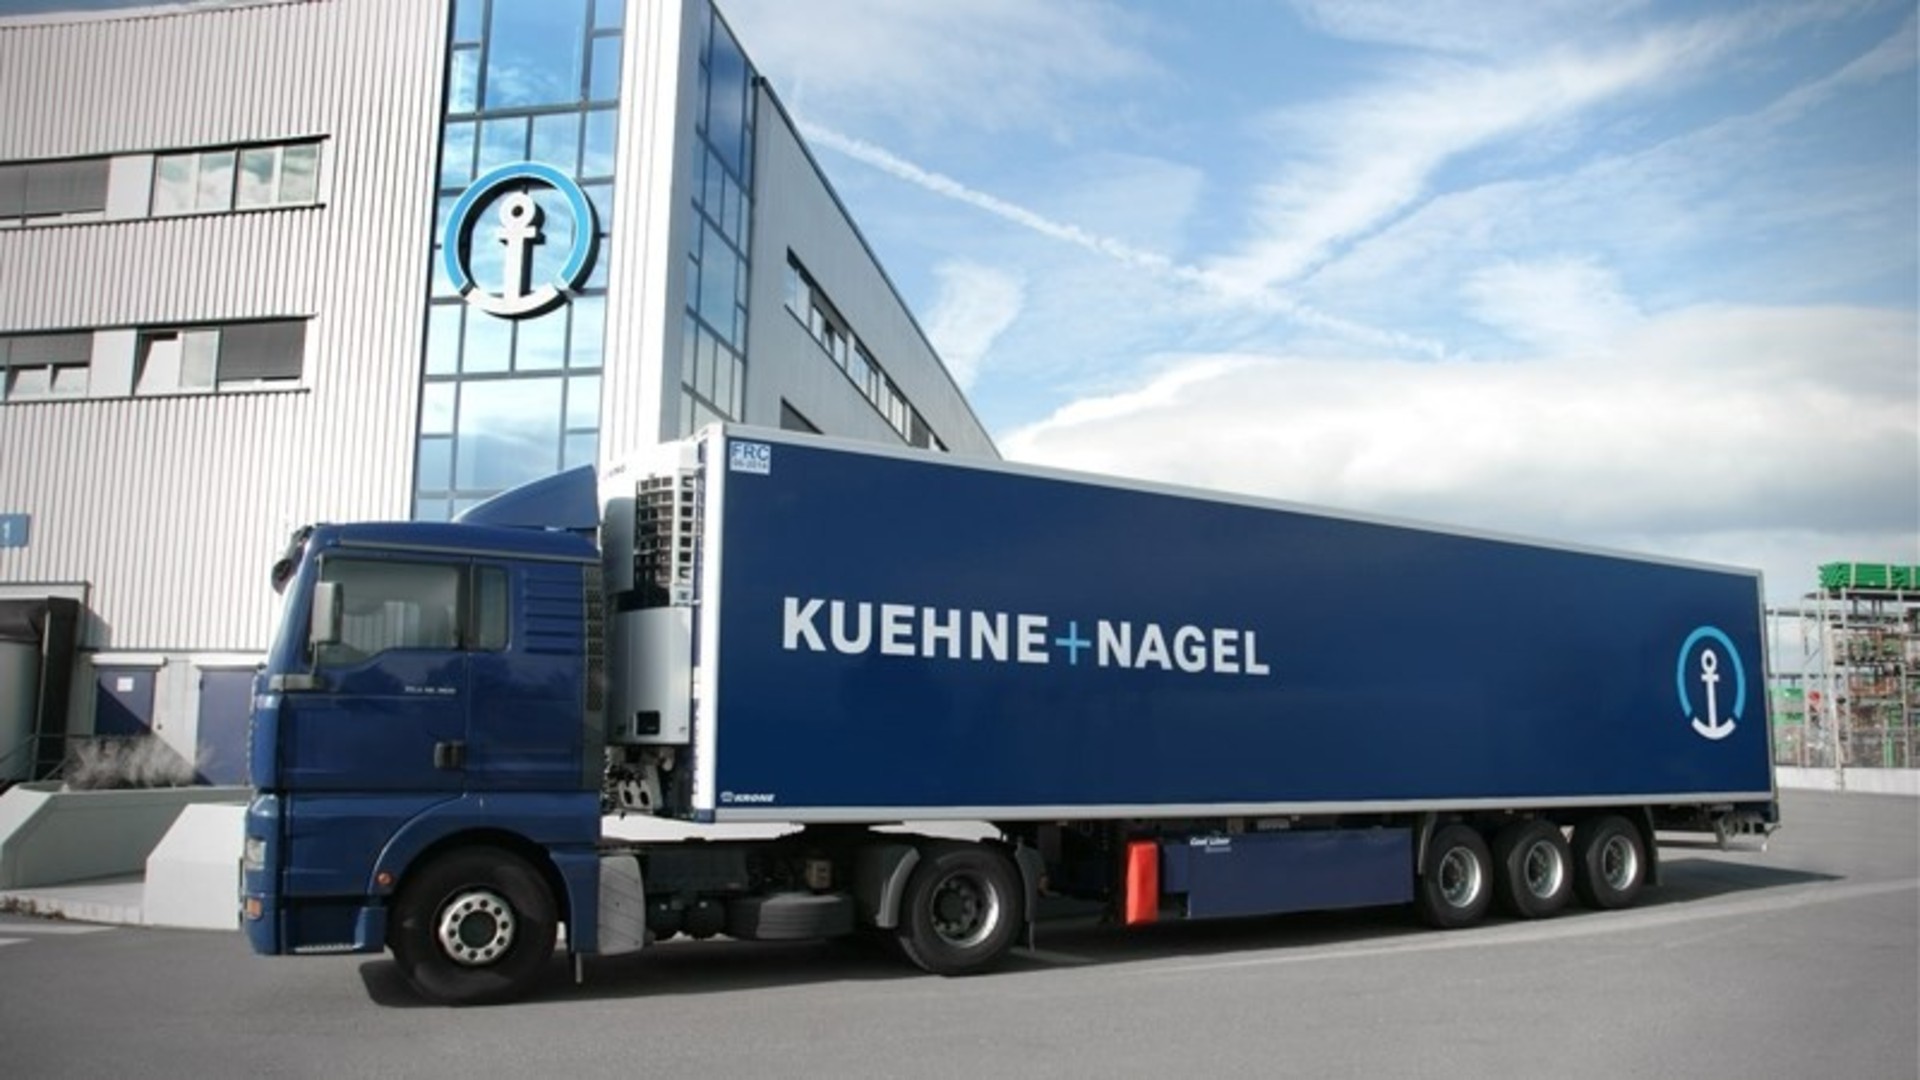 Kuehne + Nagel launches KN Packaging to address growing demand in